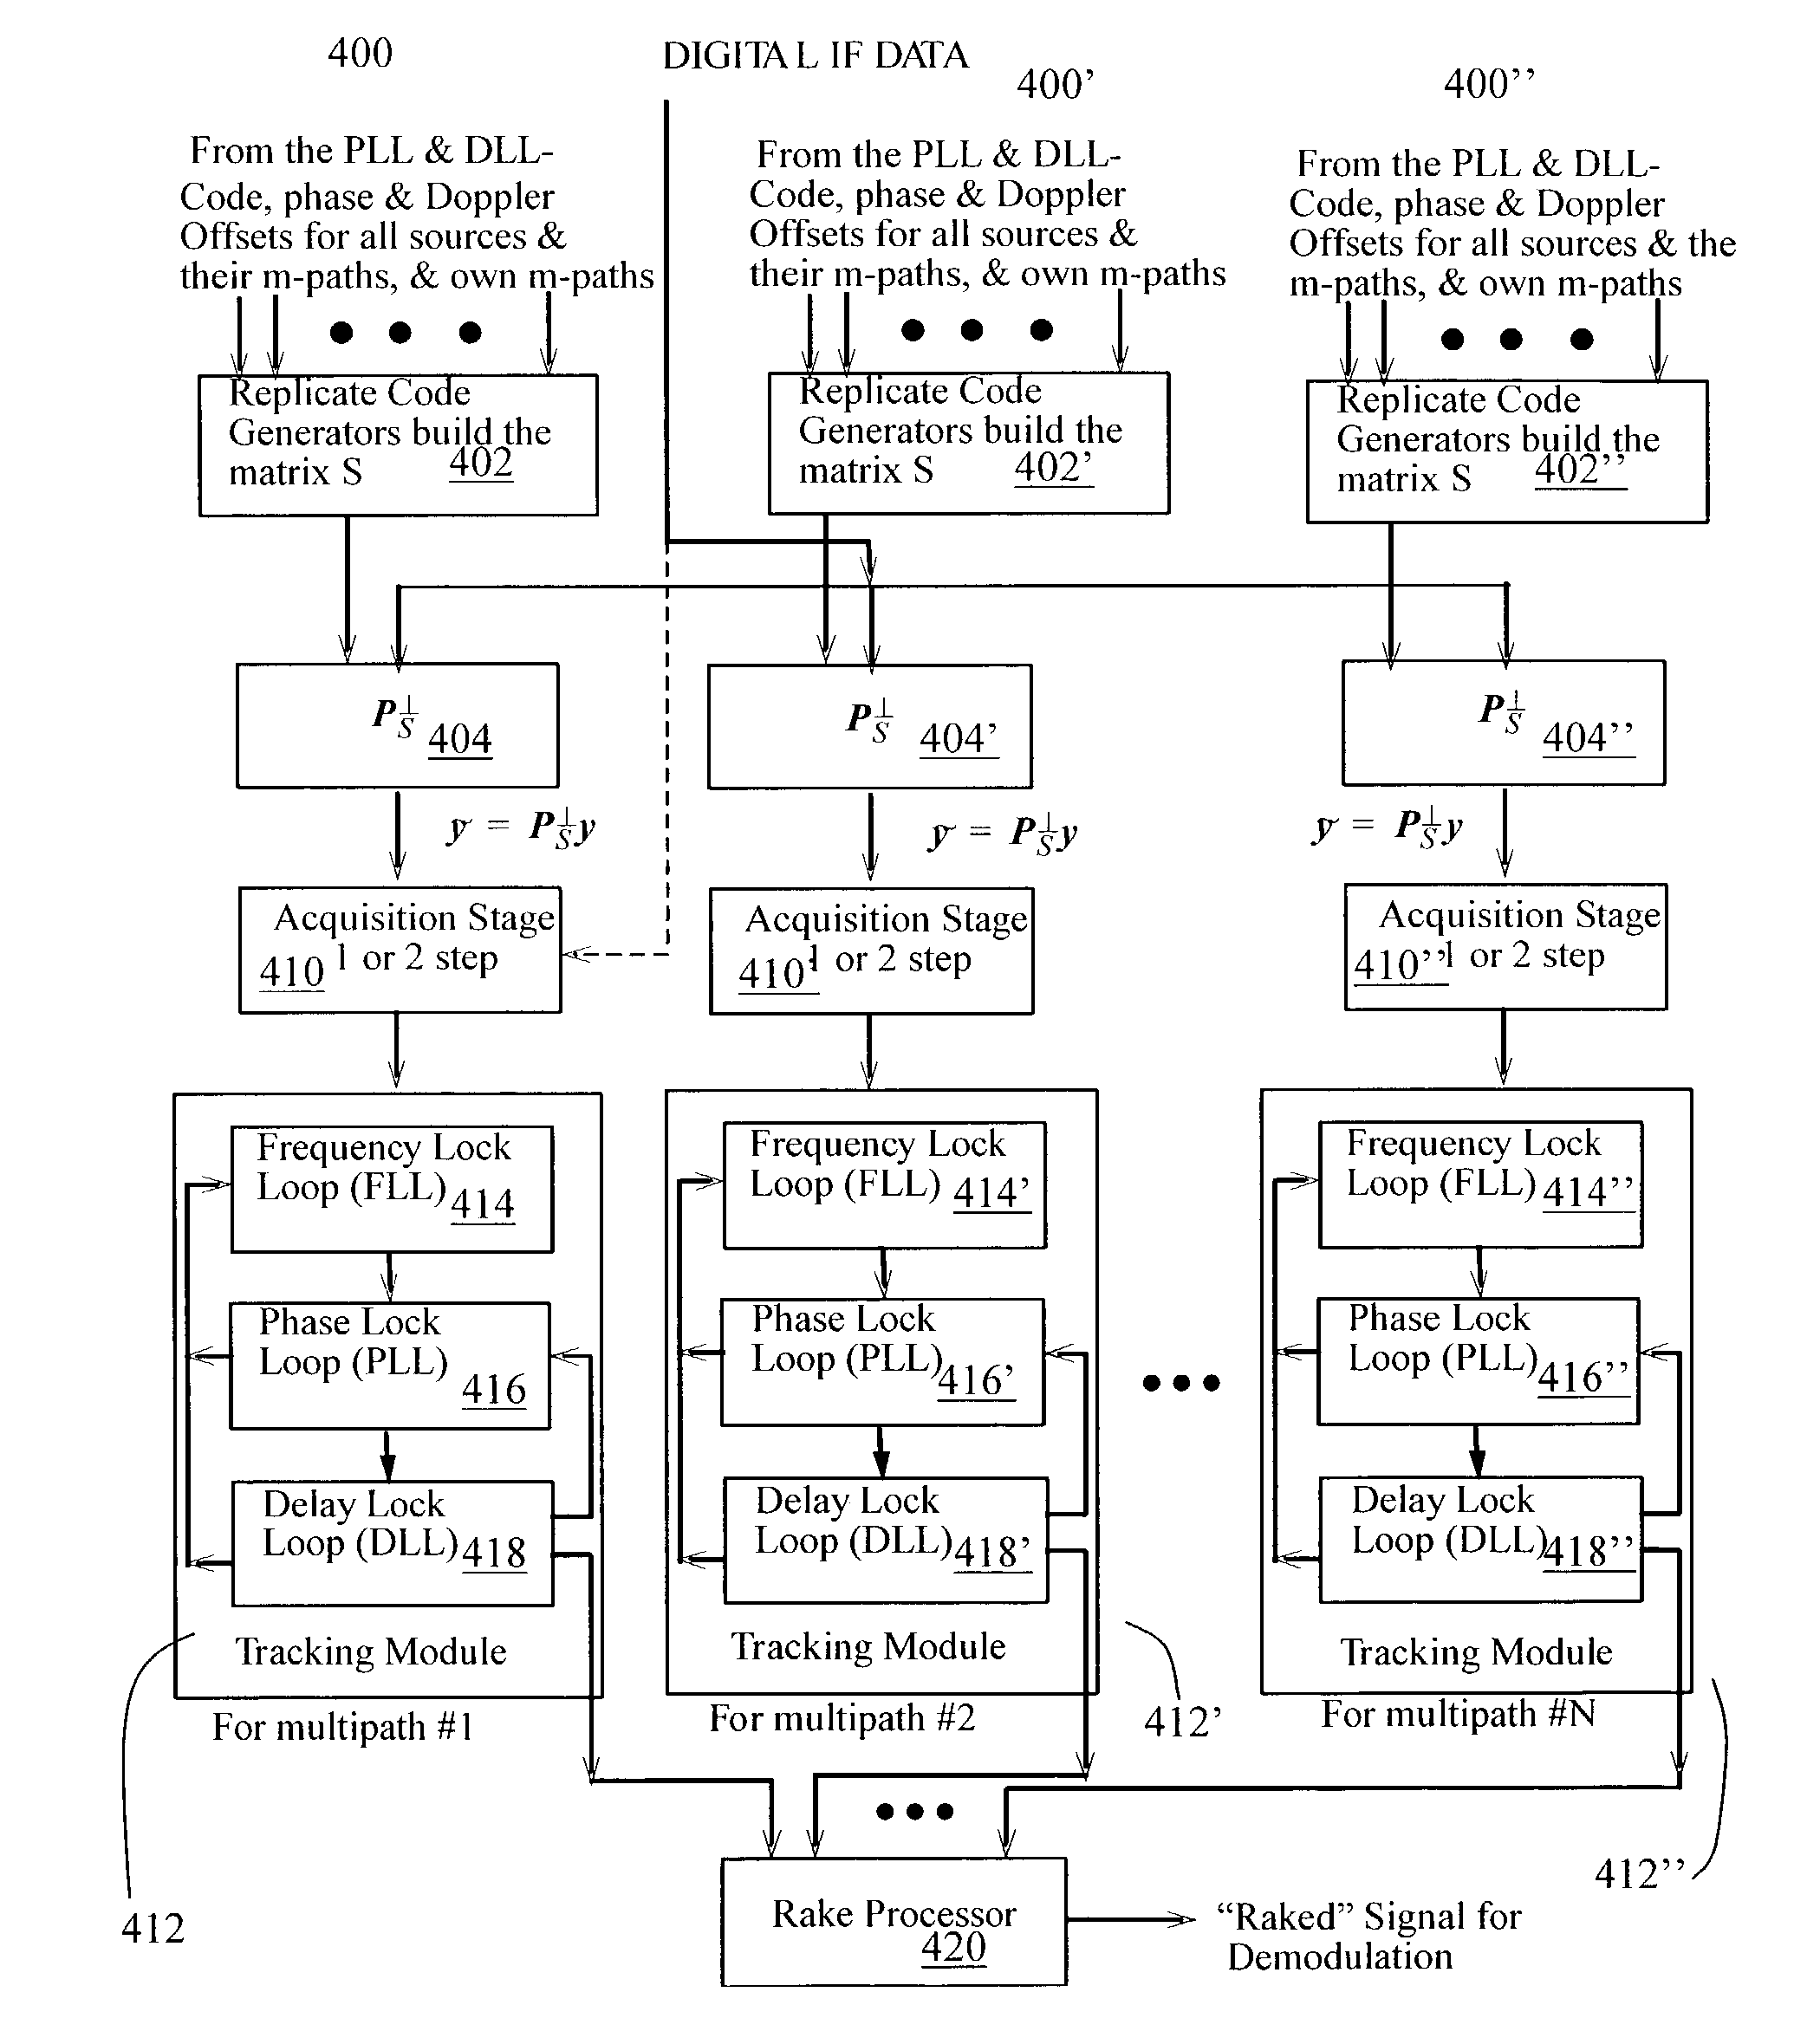 Construction of an interference matrix for a coded signal processing engine